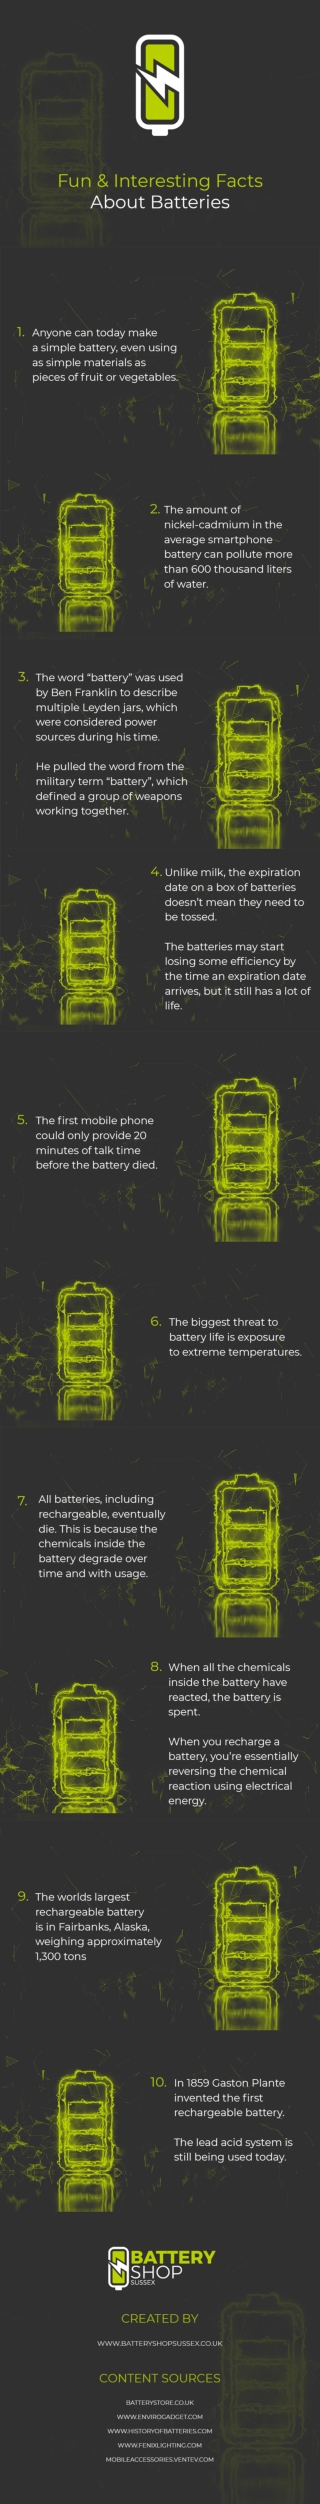 Fun & Interesting Facts About Batteries